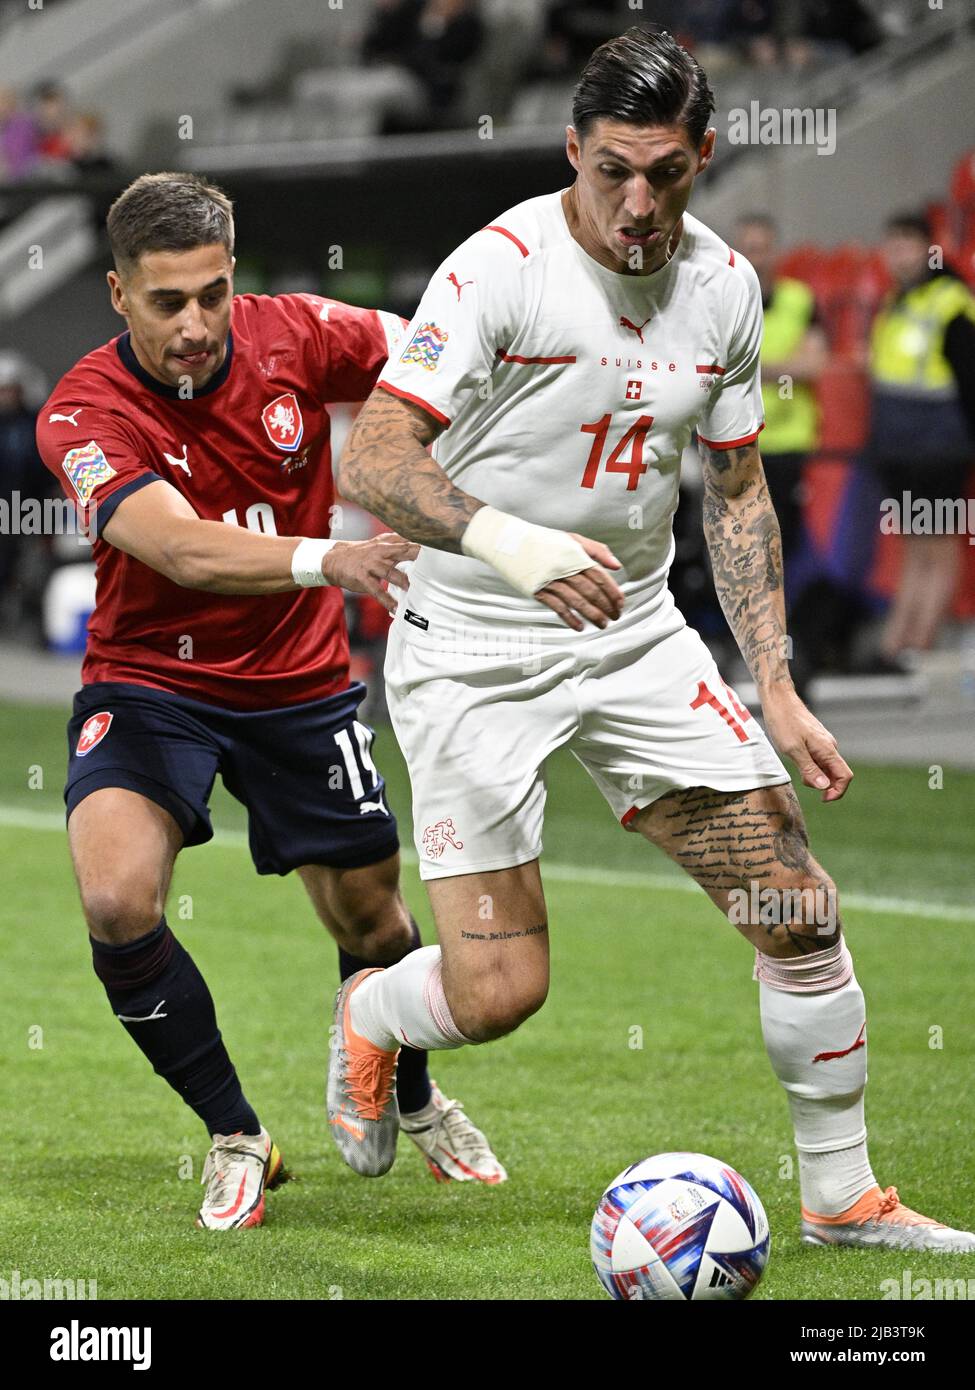 Prague, Czech Republic. 02nd June, 2022. Ondrej Lingr of Czech Republic, left, and Steven Zuber of Switzerland in action during the 1st round A2 group soccer Nations League match Czech Republic vs Switzerland in Prague, Czech Republic, June 2, 2022. Credit: Michal Kamaryt/CTK Photo/Alamy Live News Stock Photo